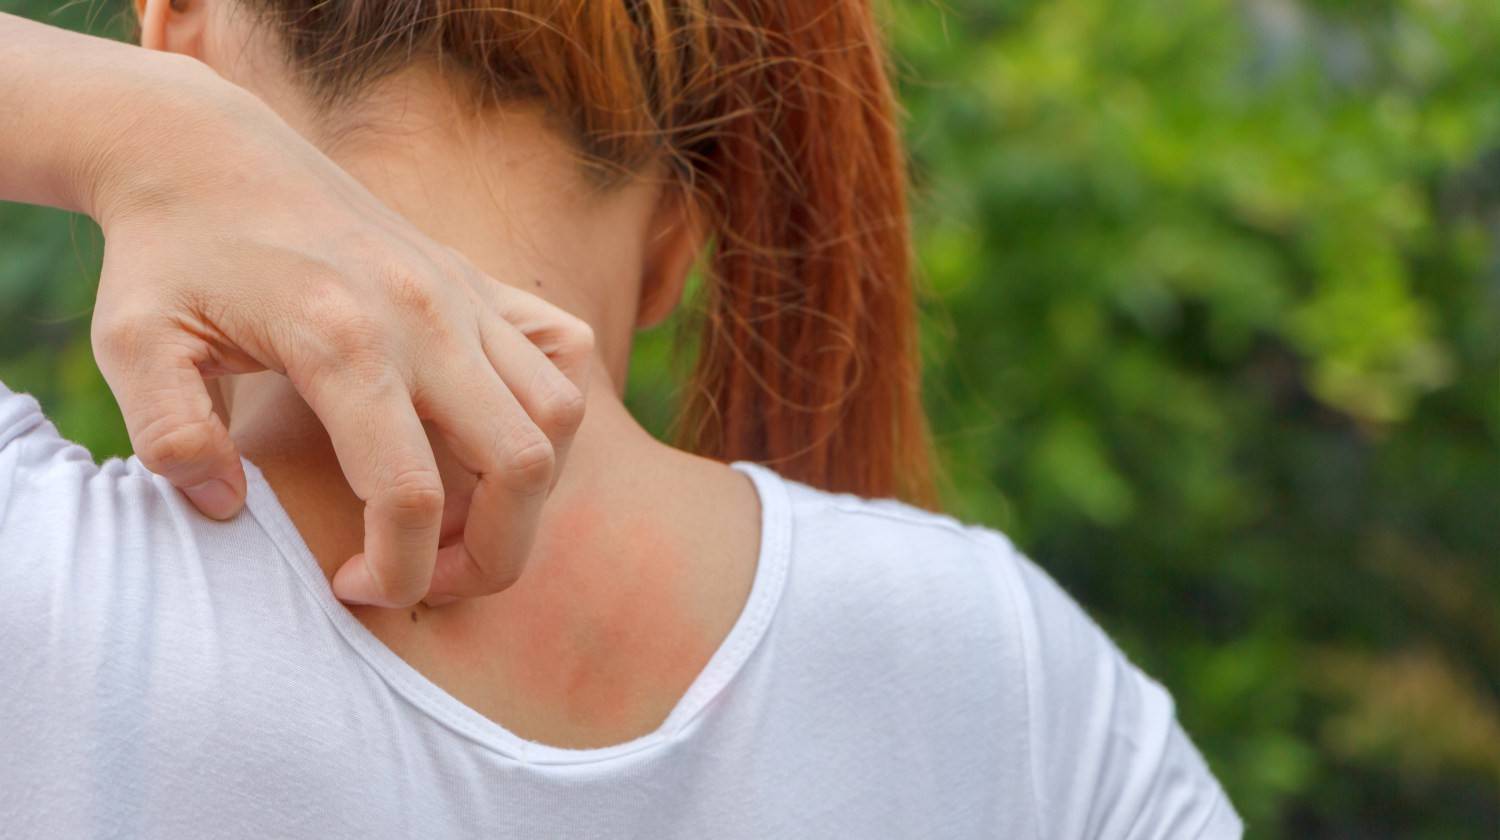 Featured | Women scratch the itch with hand | Home Remedies For Bug Bites | Naturally Treat Bug Bites, Insect Stings, and Their Annoying Itches